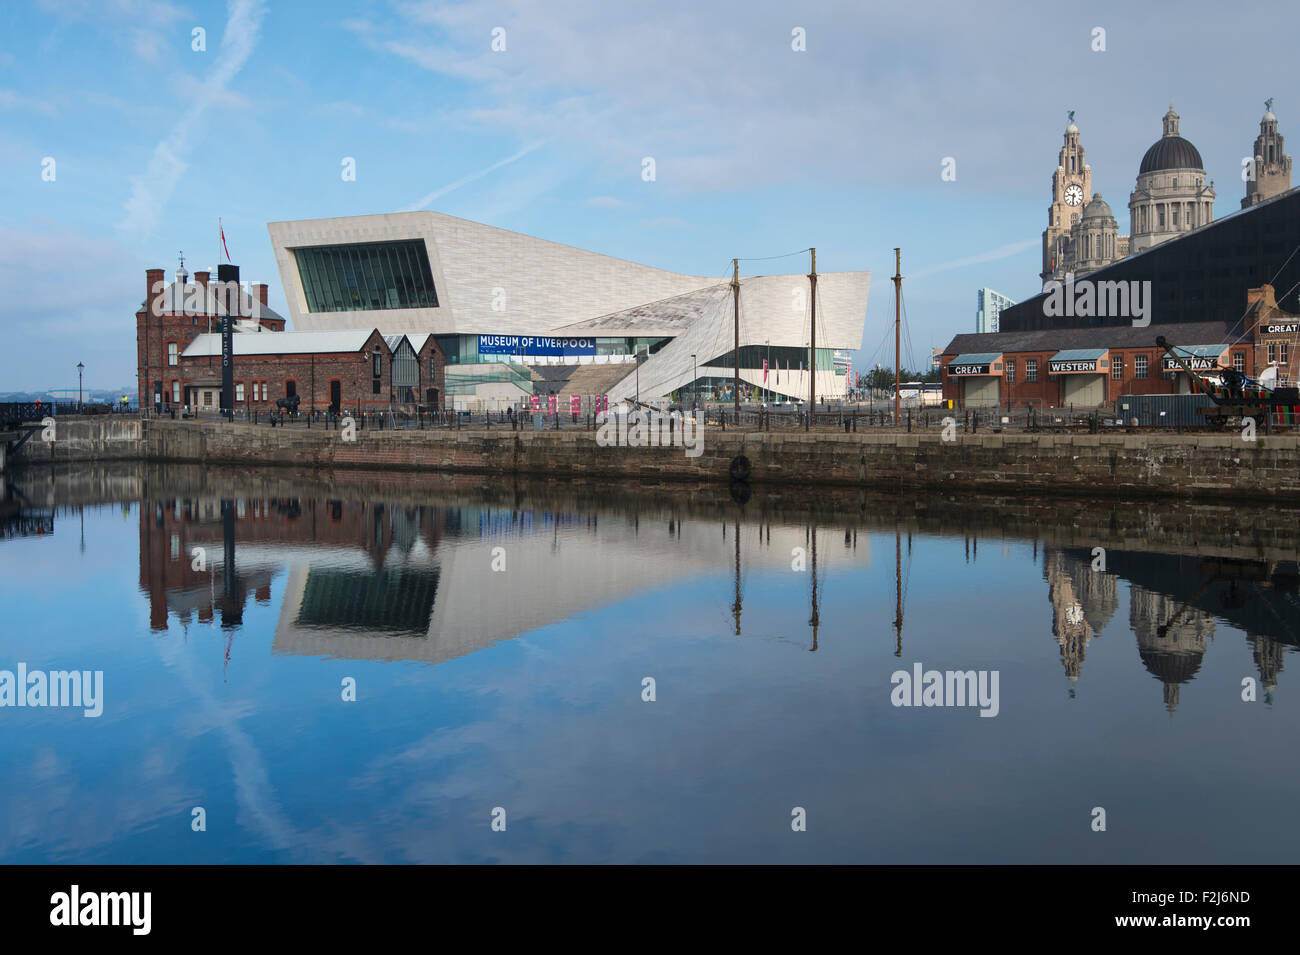 The Museum of Liverpool, The Pier Head, Liverpool Waterfront, Liverpool, Merseyside, UK Stock Photo